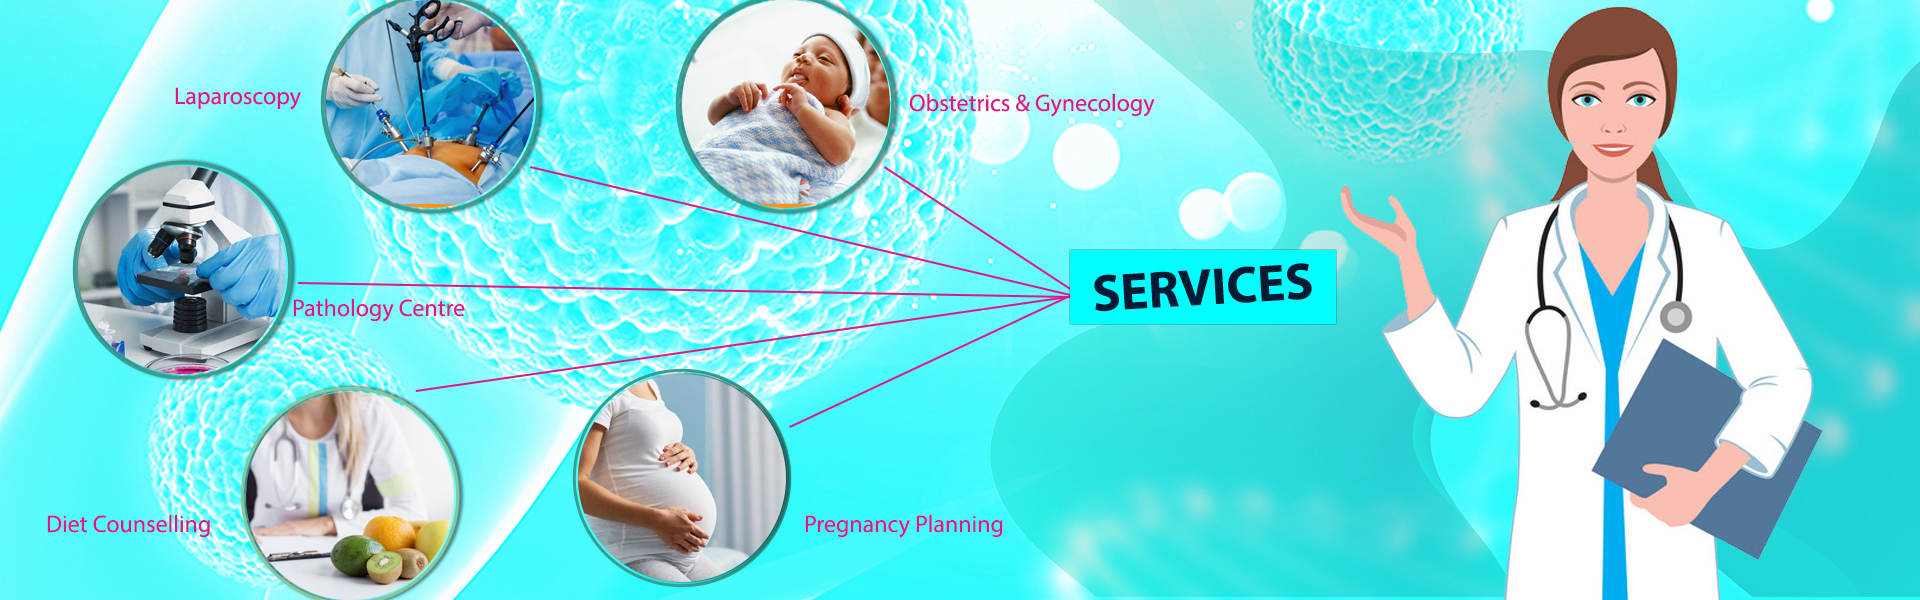 Gynecologist in Greater Noida